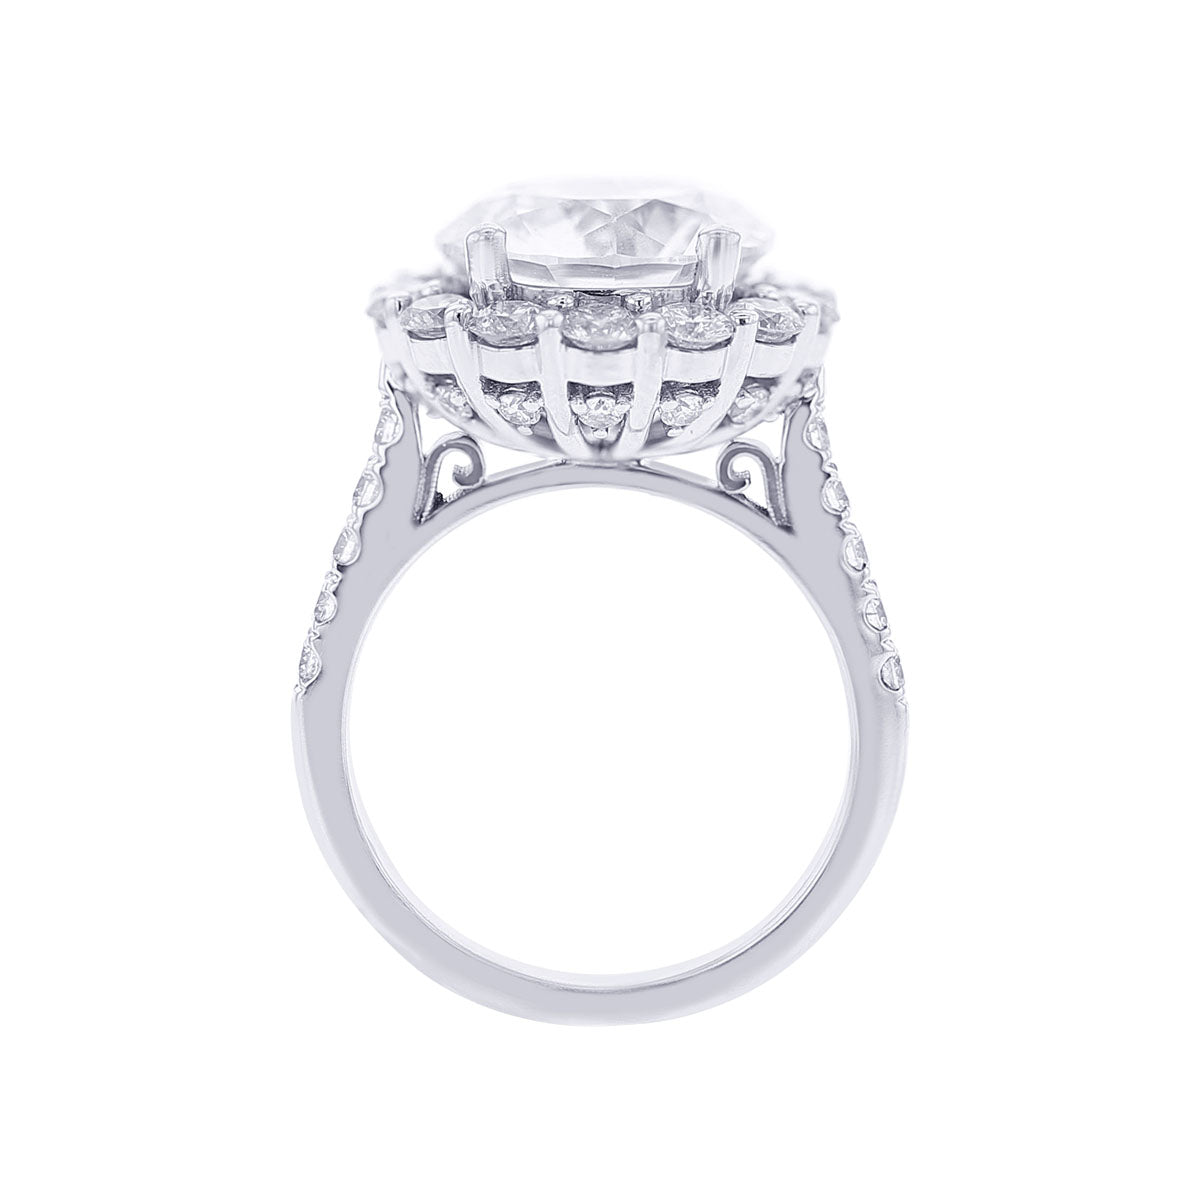 Adelaide Certified Ready for Love Engagement Ring 7 1/2ct